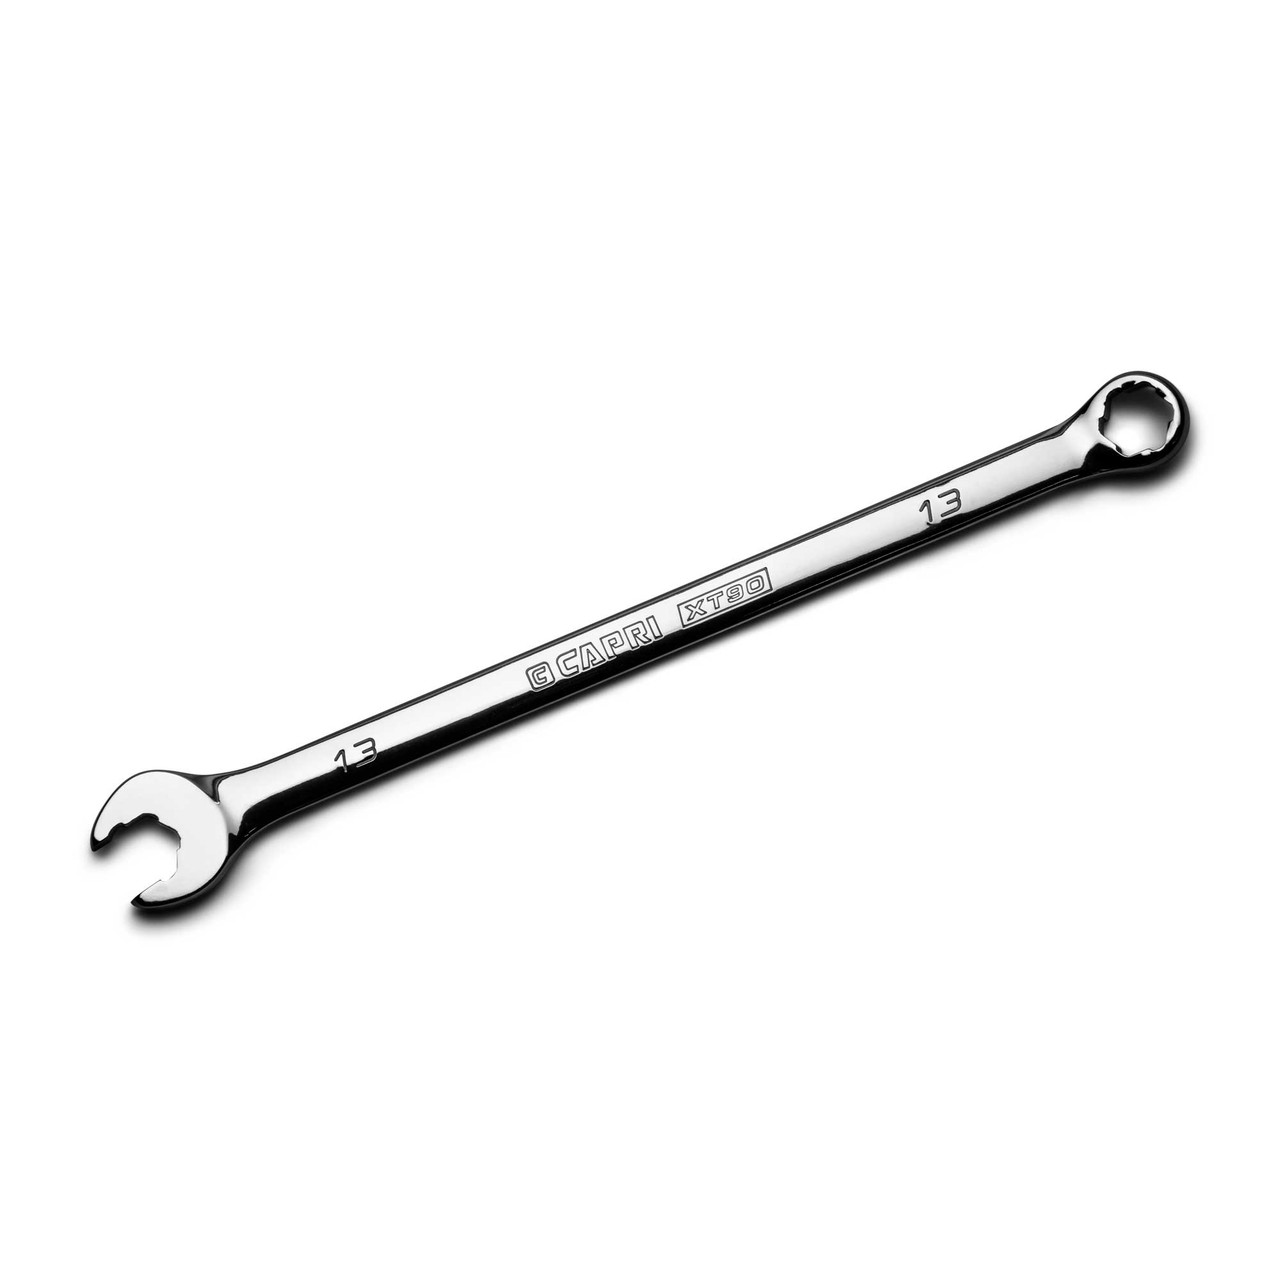 Capri Tools 13 mm WaveDrive Pro Combination Wrench for Regular and Rounded Bolts